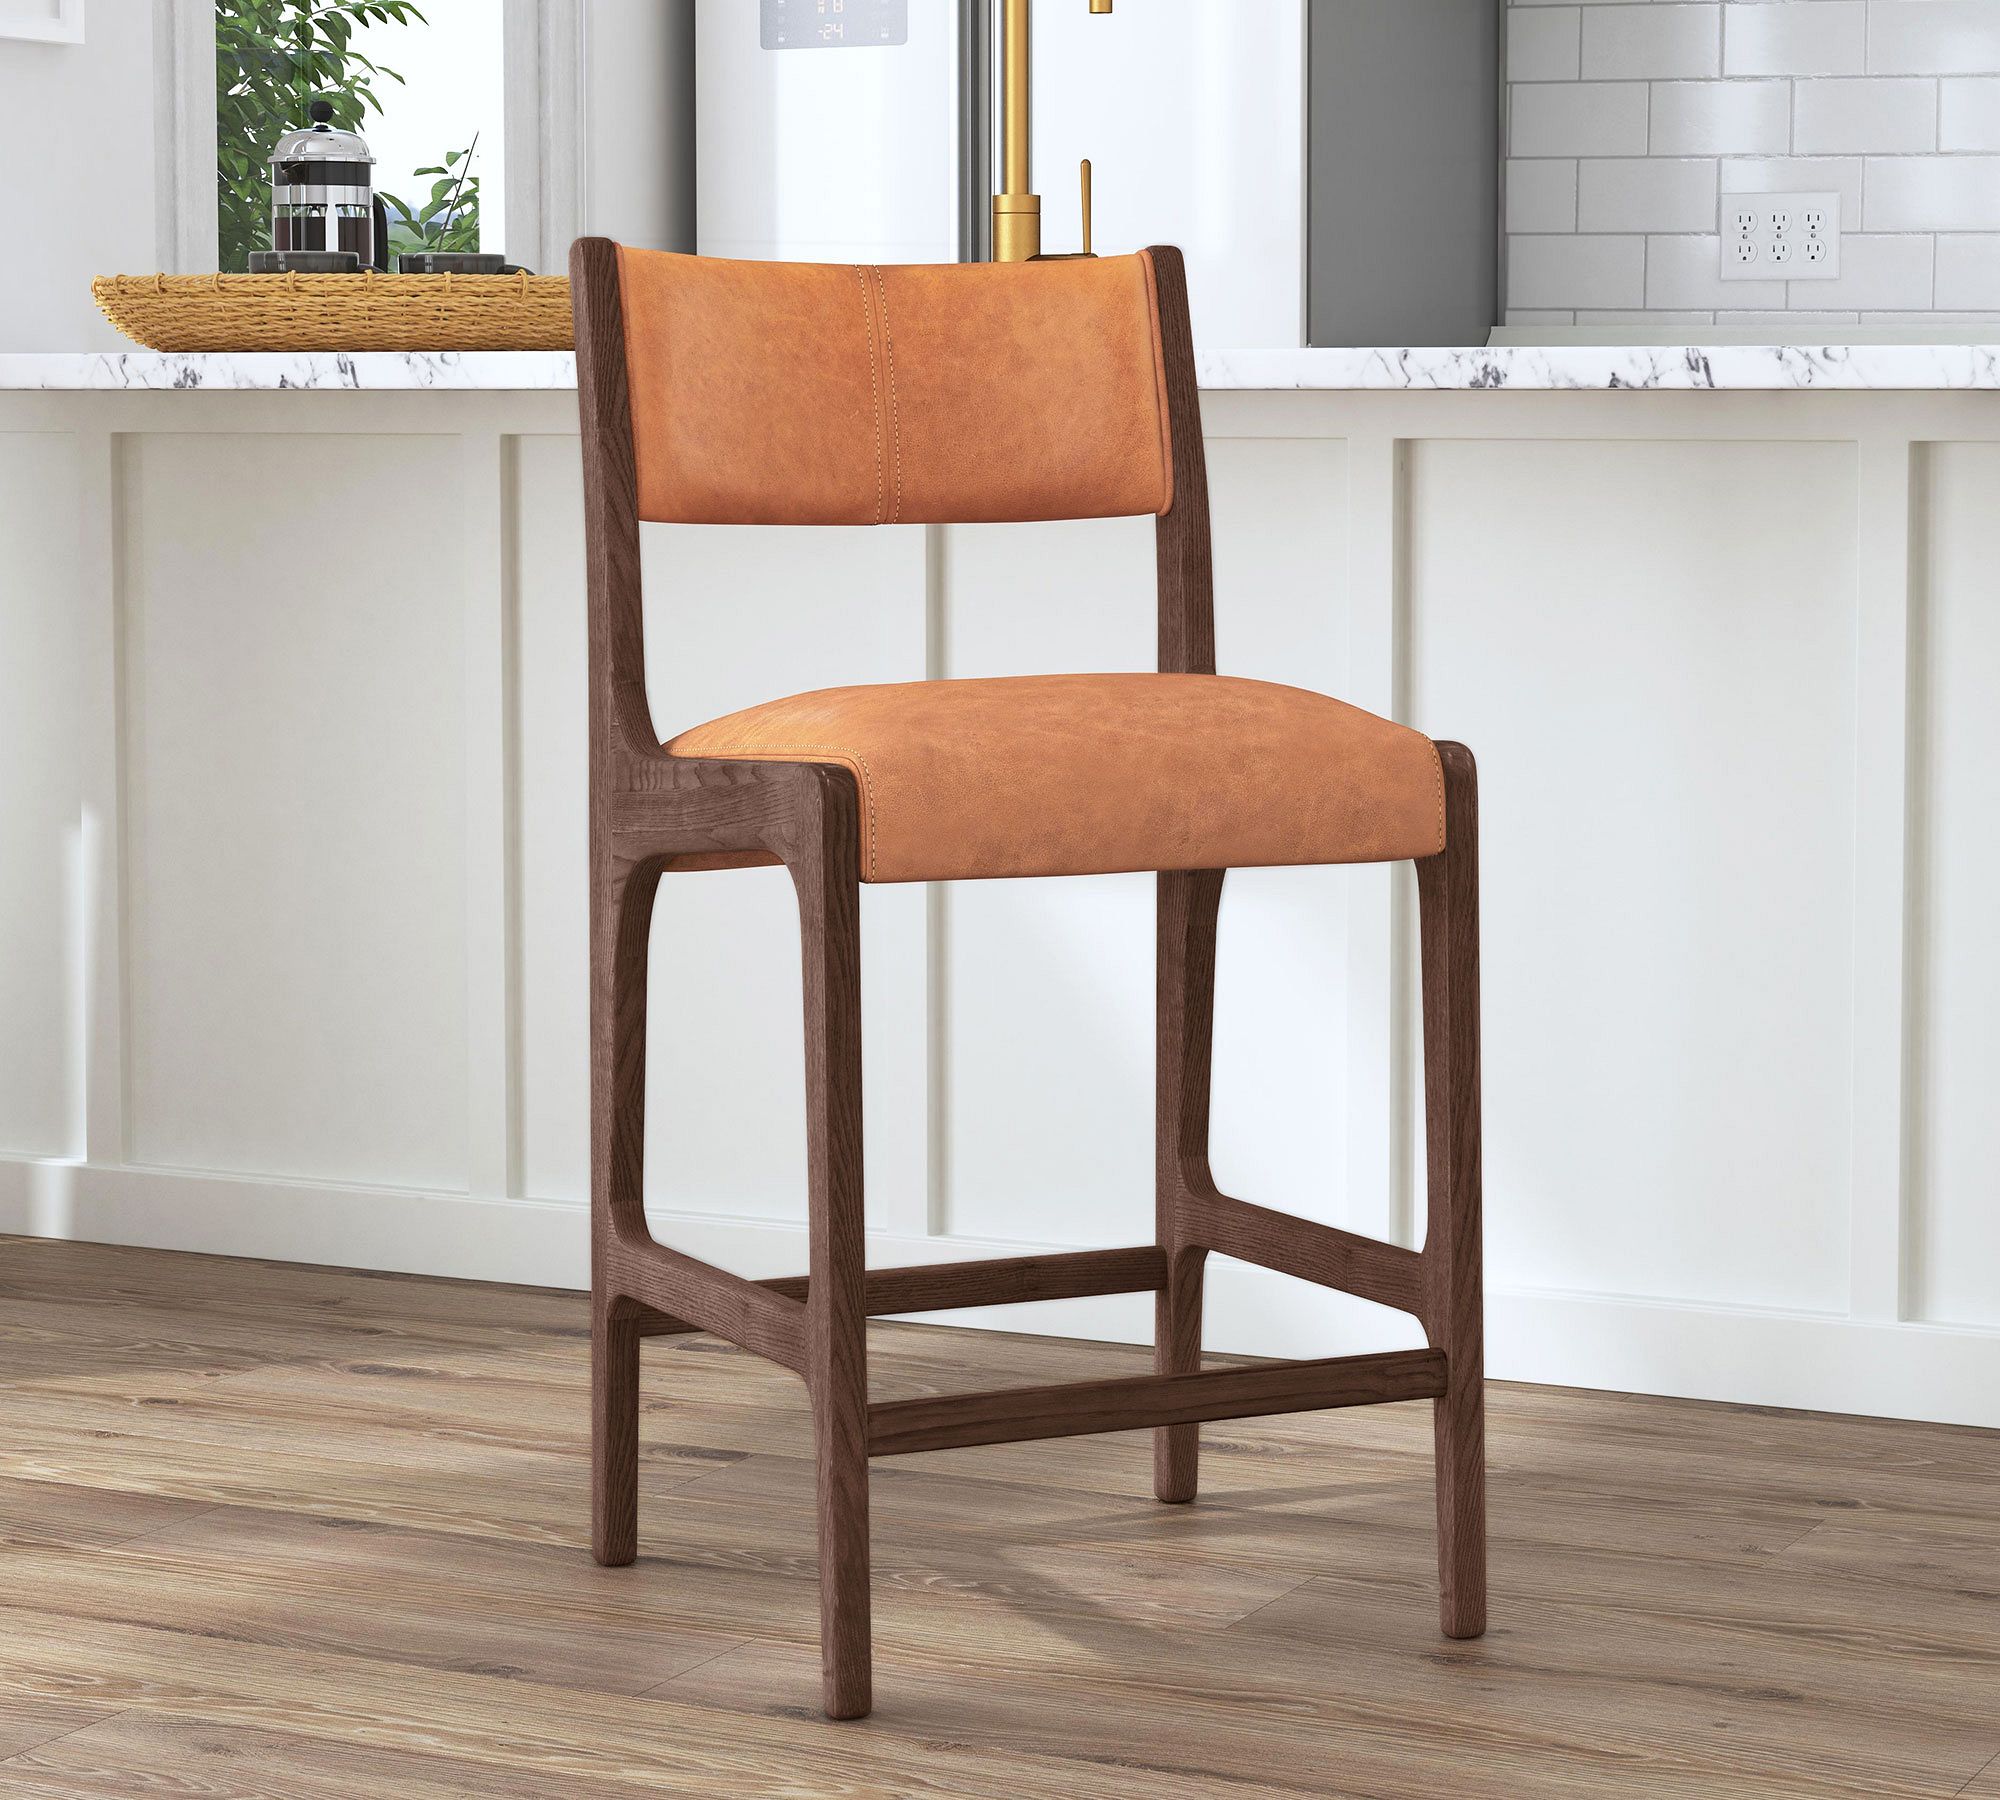 Gilly Leather Stool